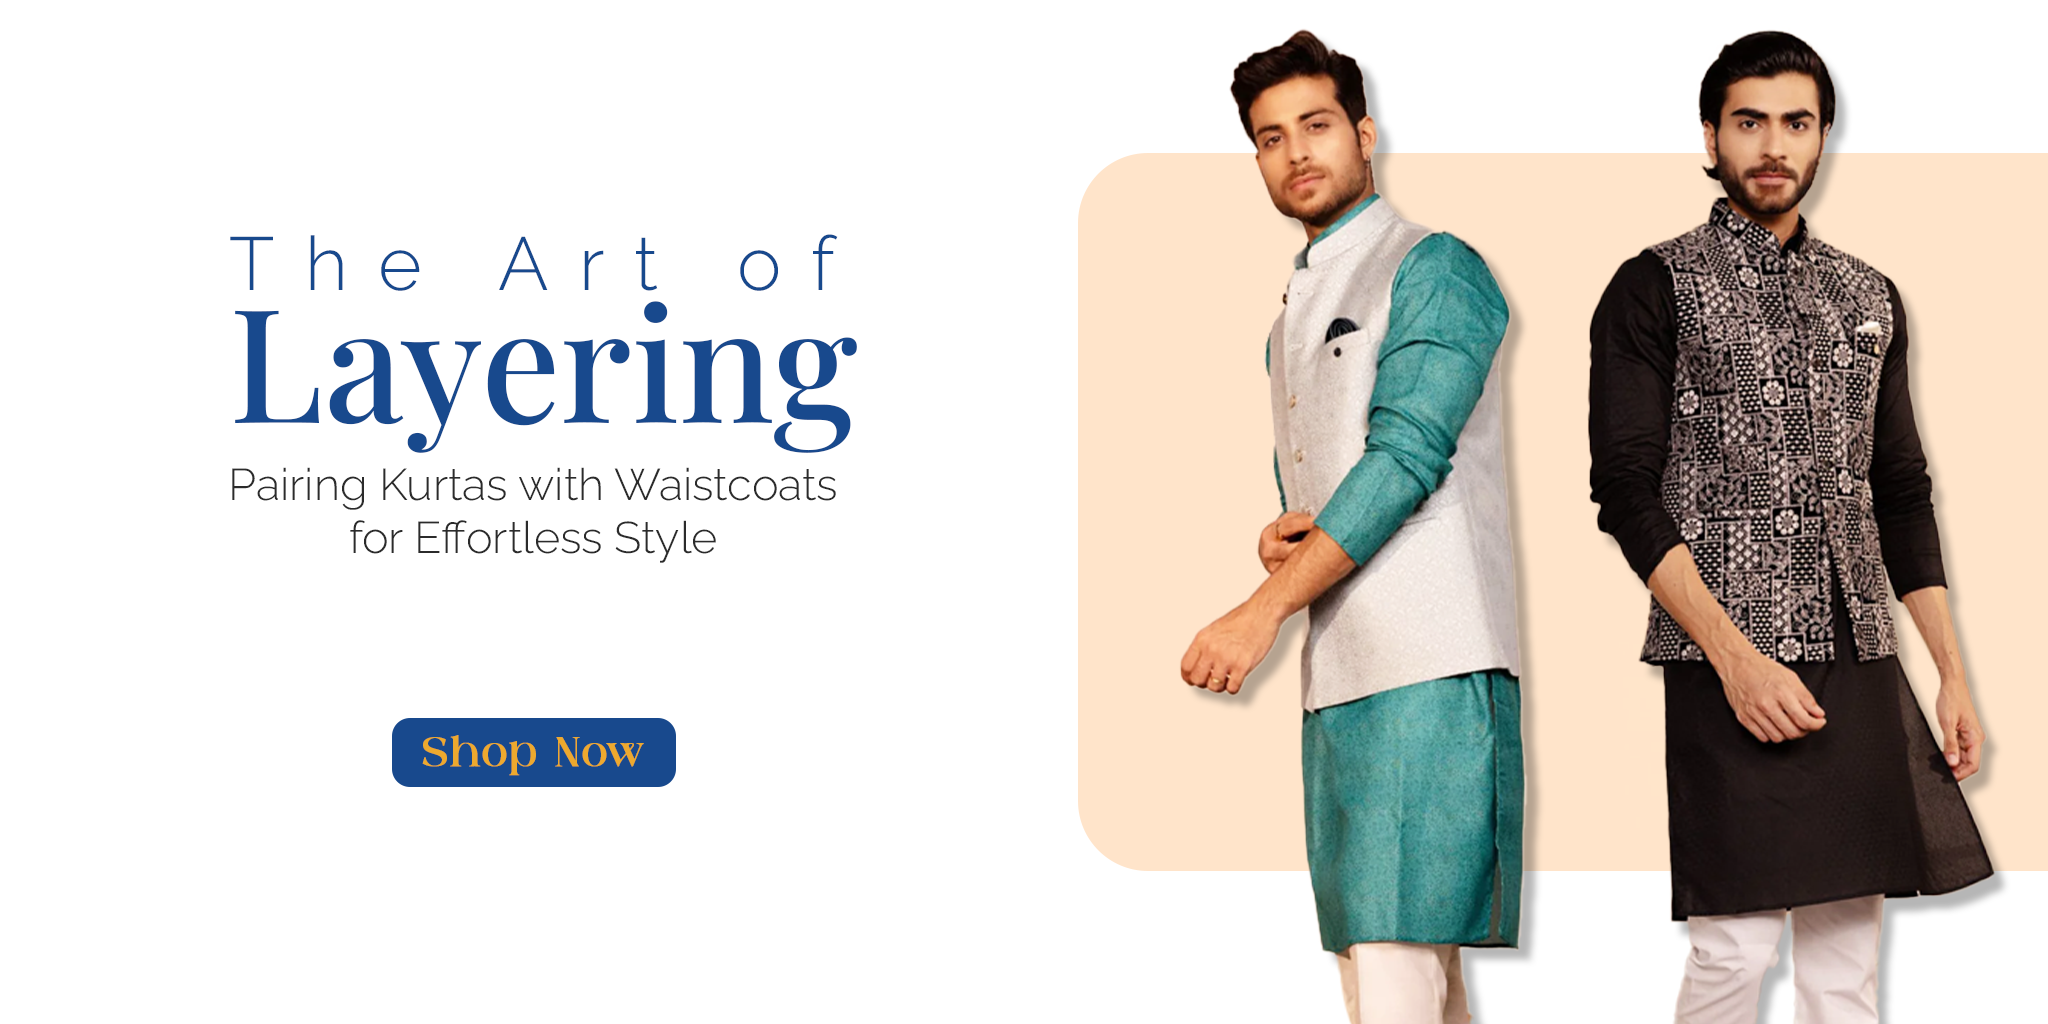 The Art of Layering: Pairing Kurtas with Waistcoats for Effortless Style